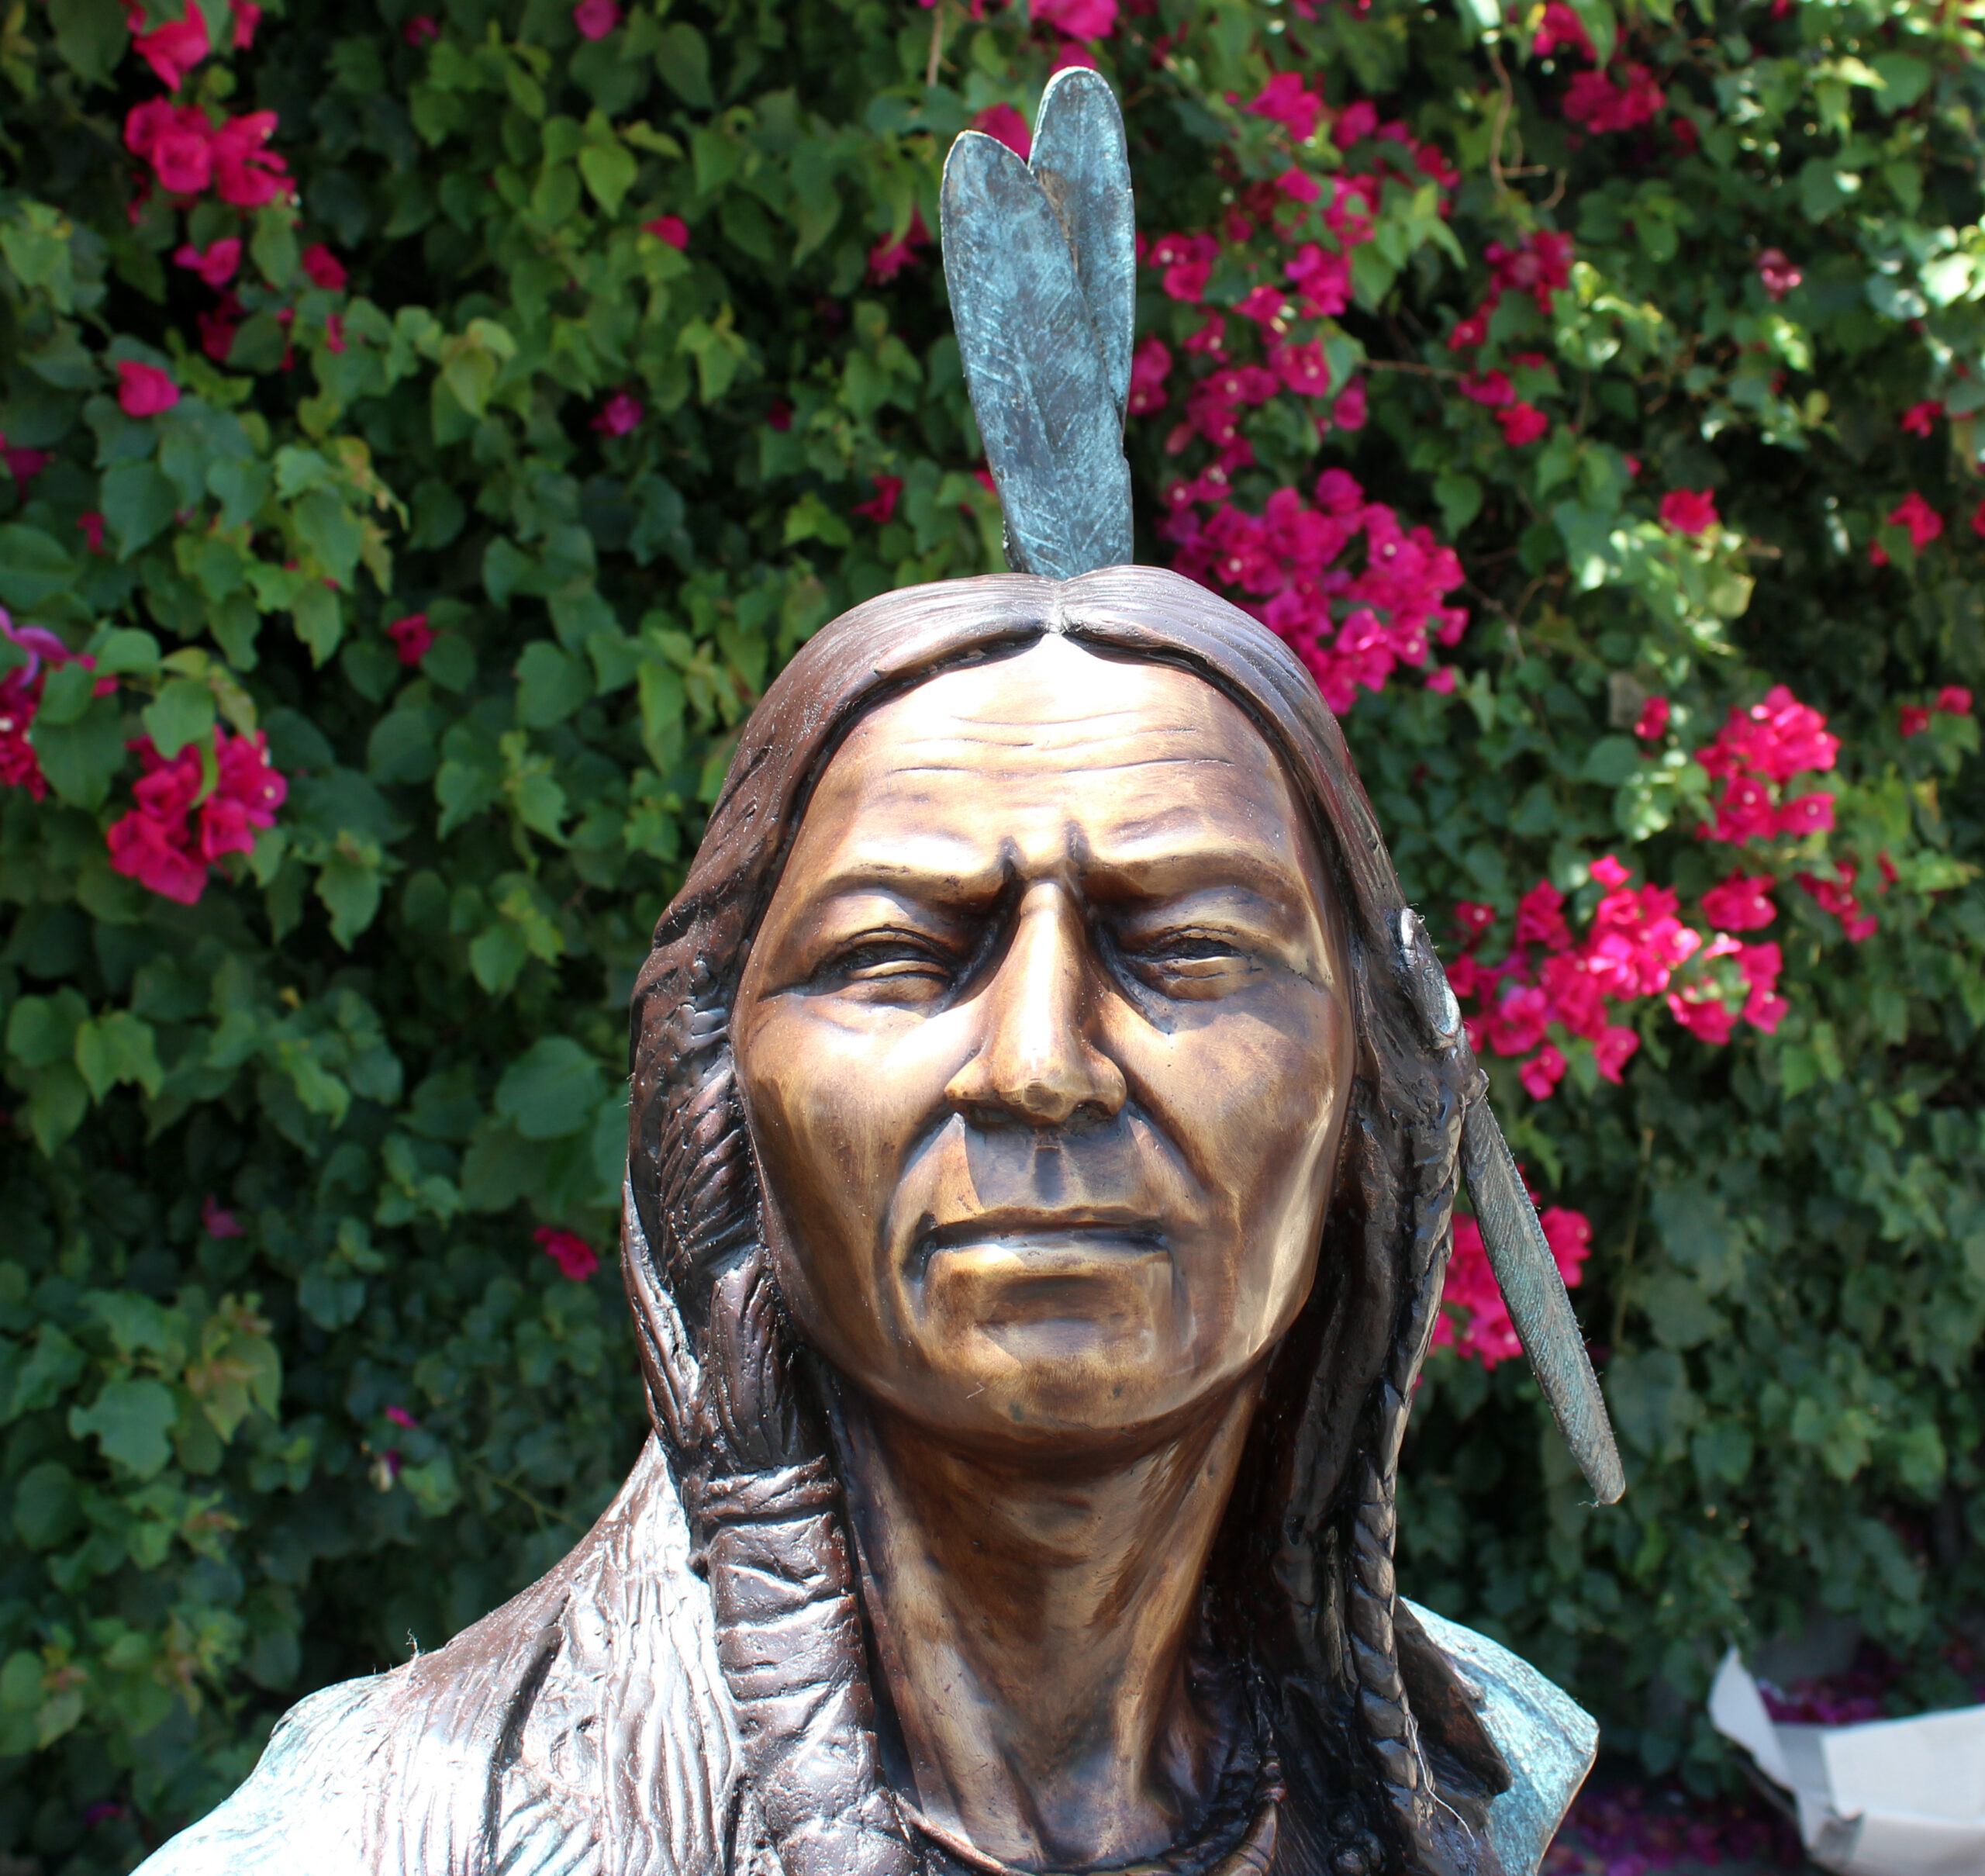 bronze statue of a native american bust